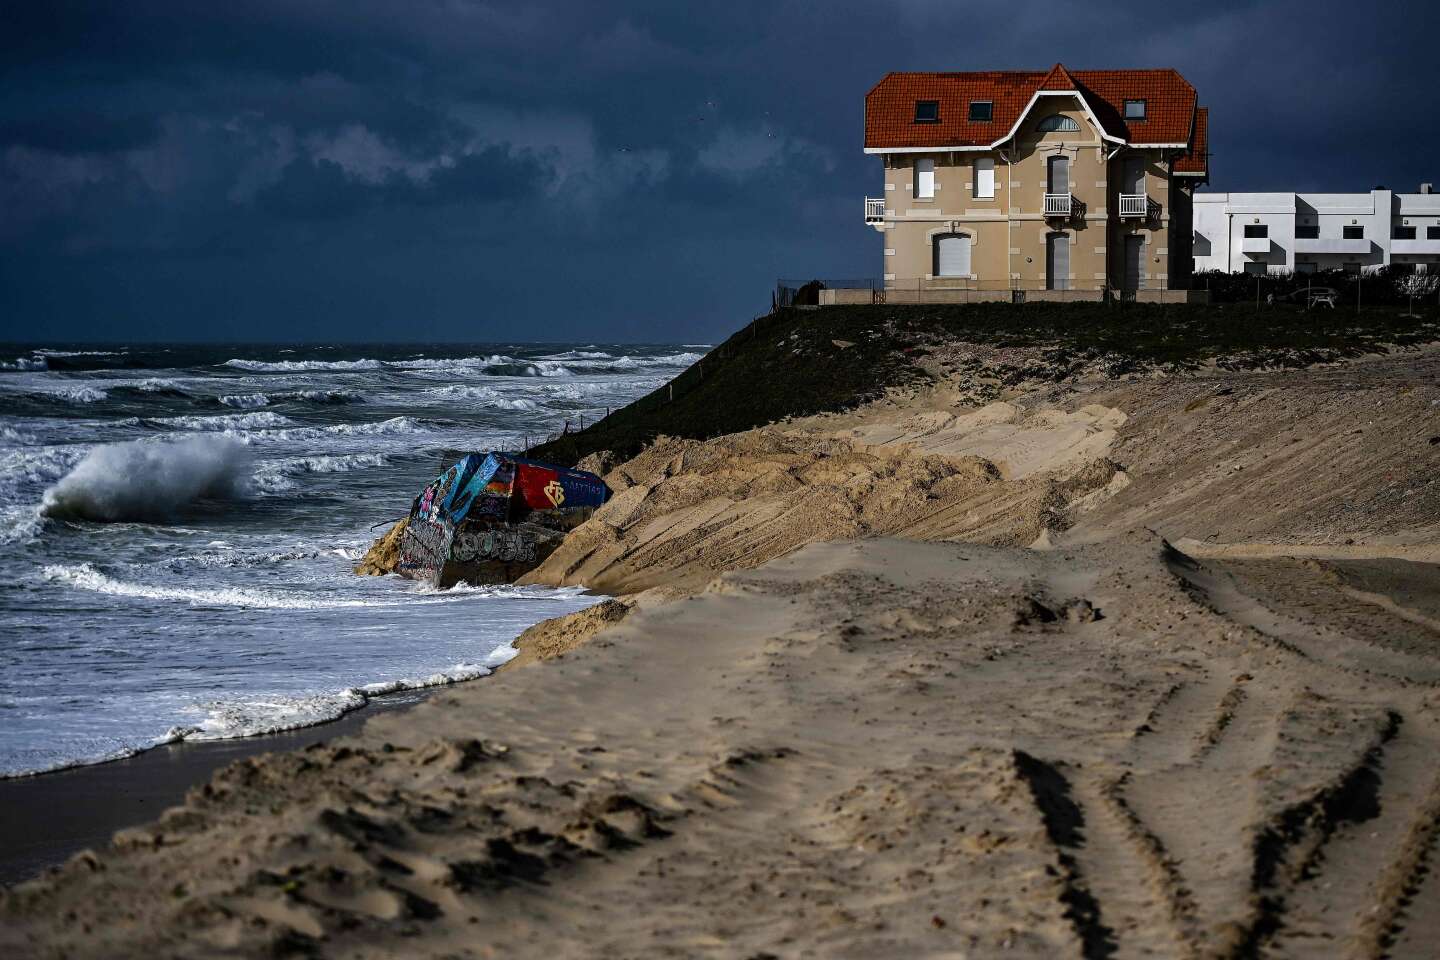 By 2100, coastal erosion will have affected thousands of buildings in France